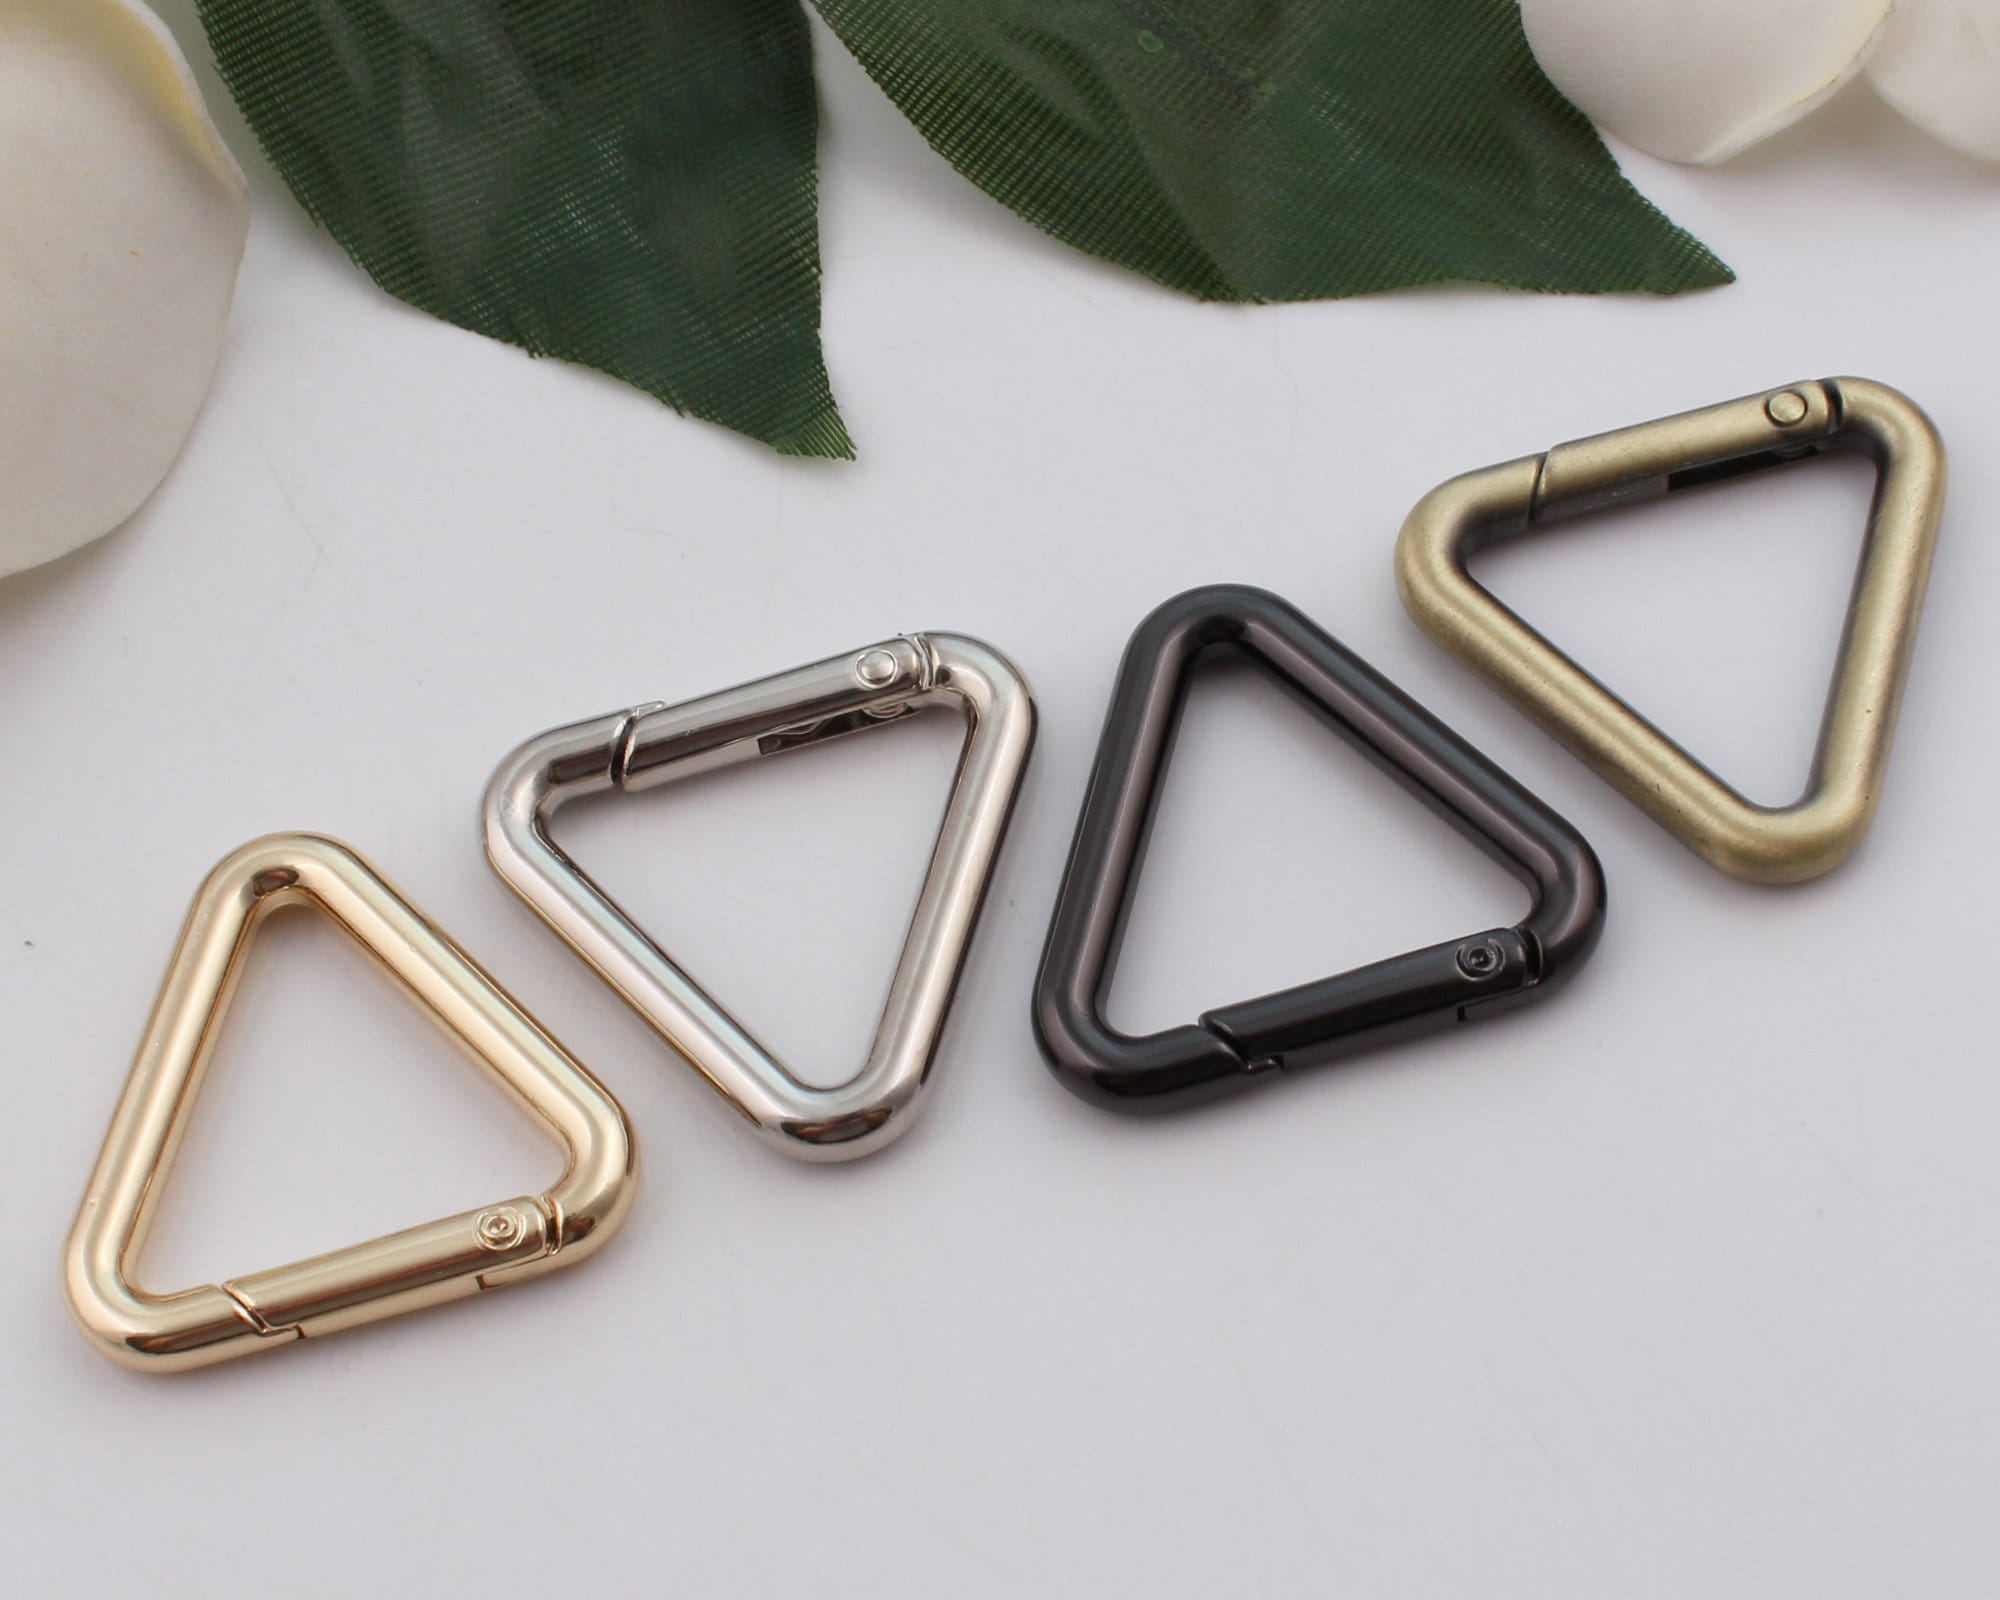 advancethy Metal Silvery Triangle Ring Buckle 1.5 Inside Dia Loop Ring for Strap Keeper Pack of 10 